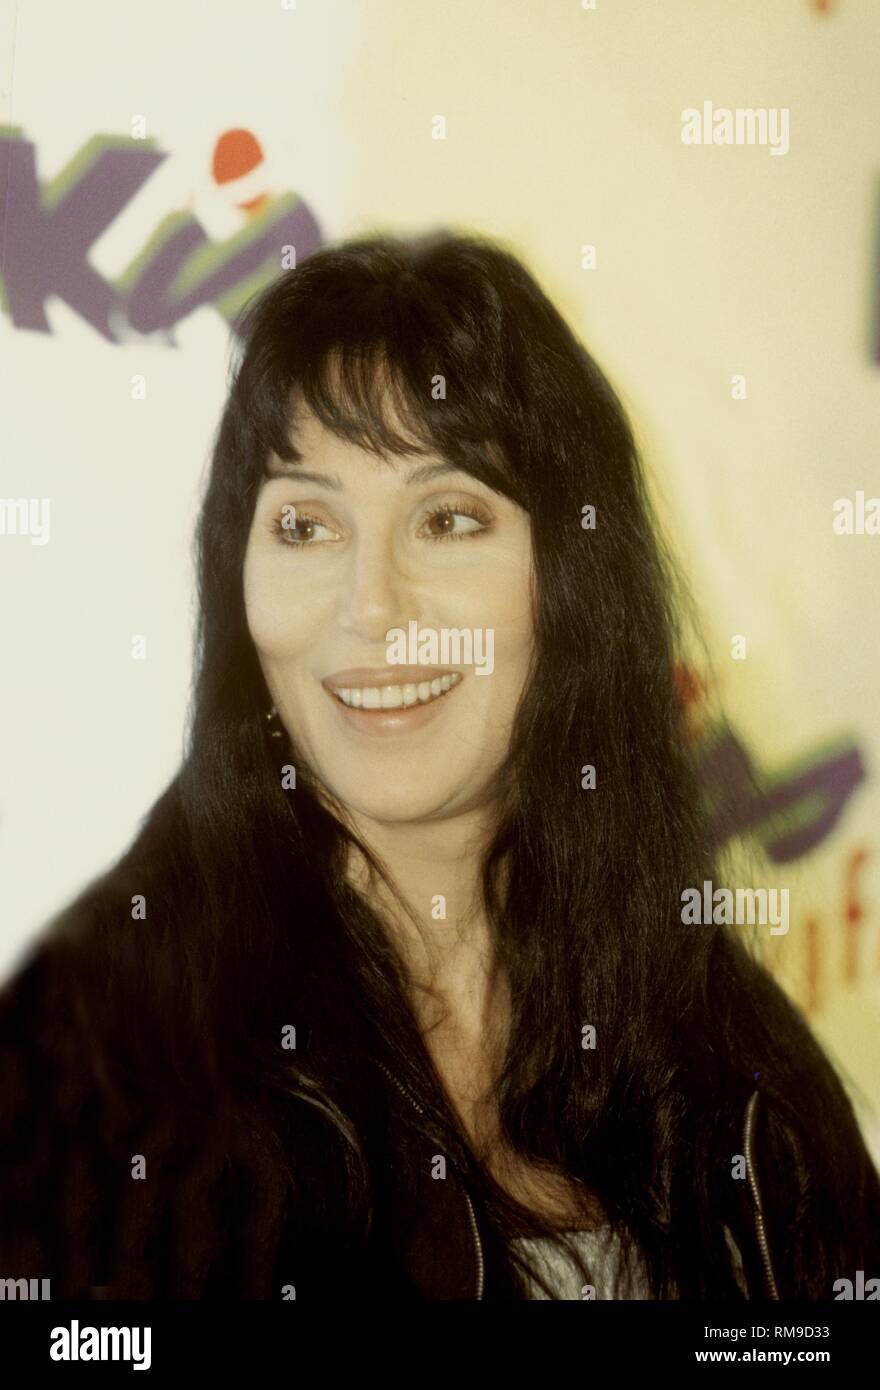 Singer, songwriter, actress and movie producer Cher, born Cherilyn Sarkisian, is shown during a press conference that followed her concert performance. Stock Photo